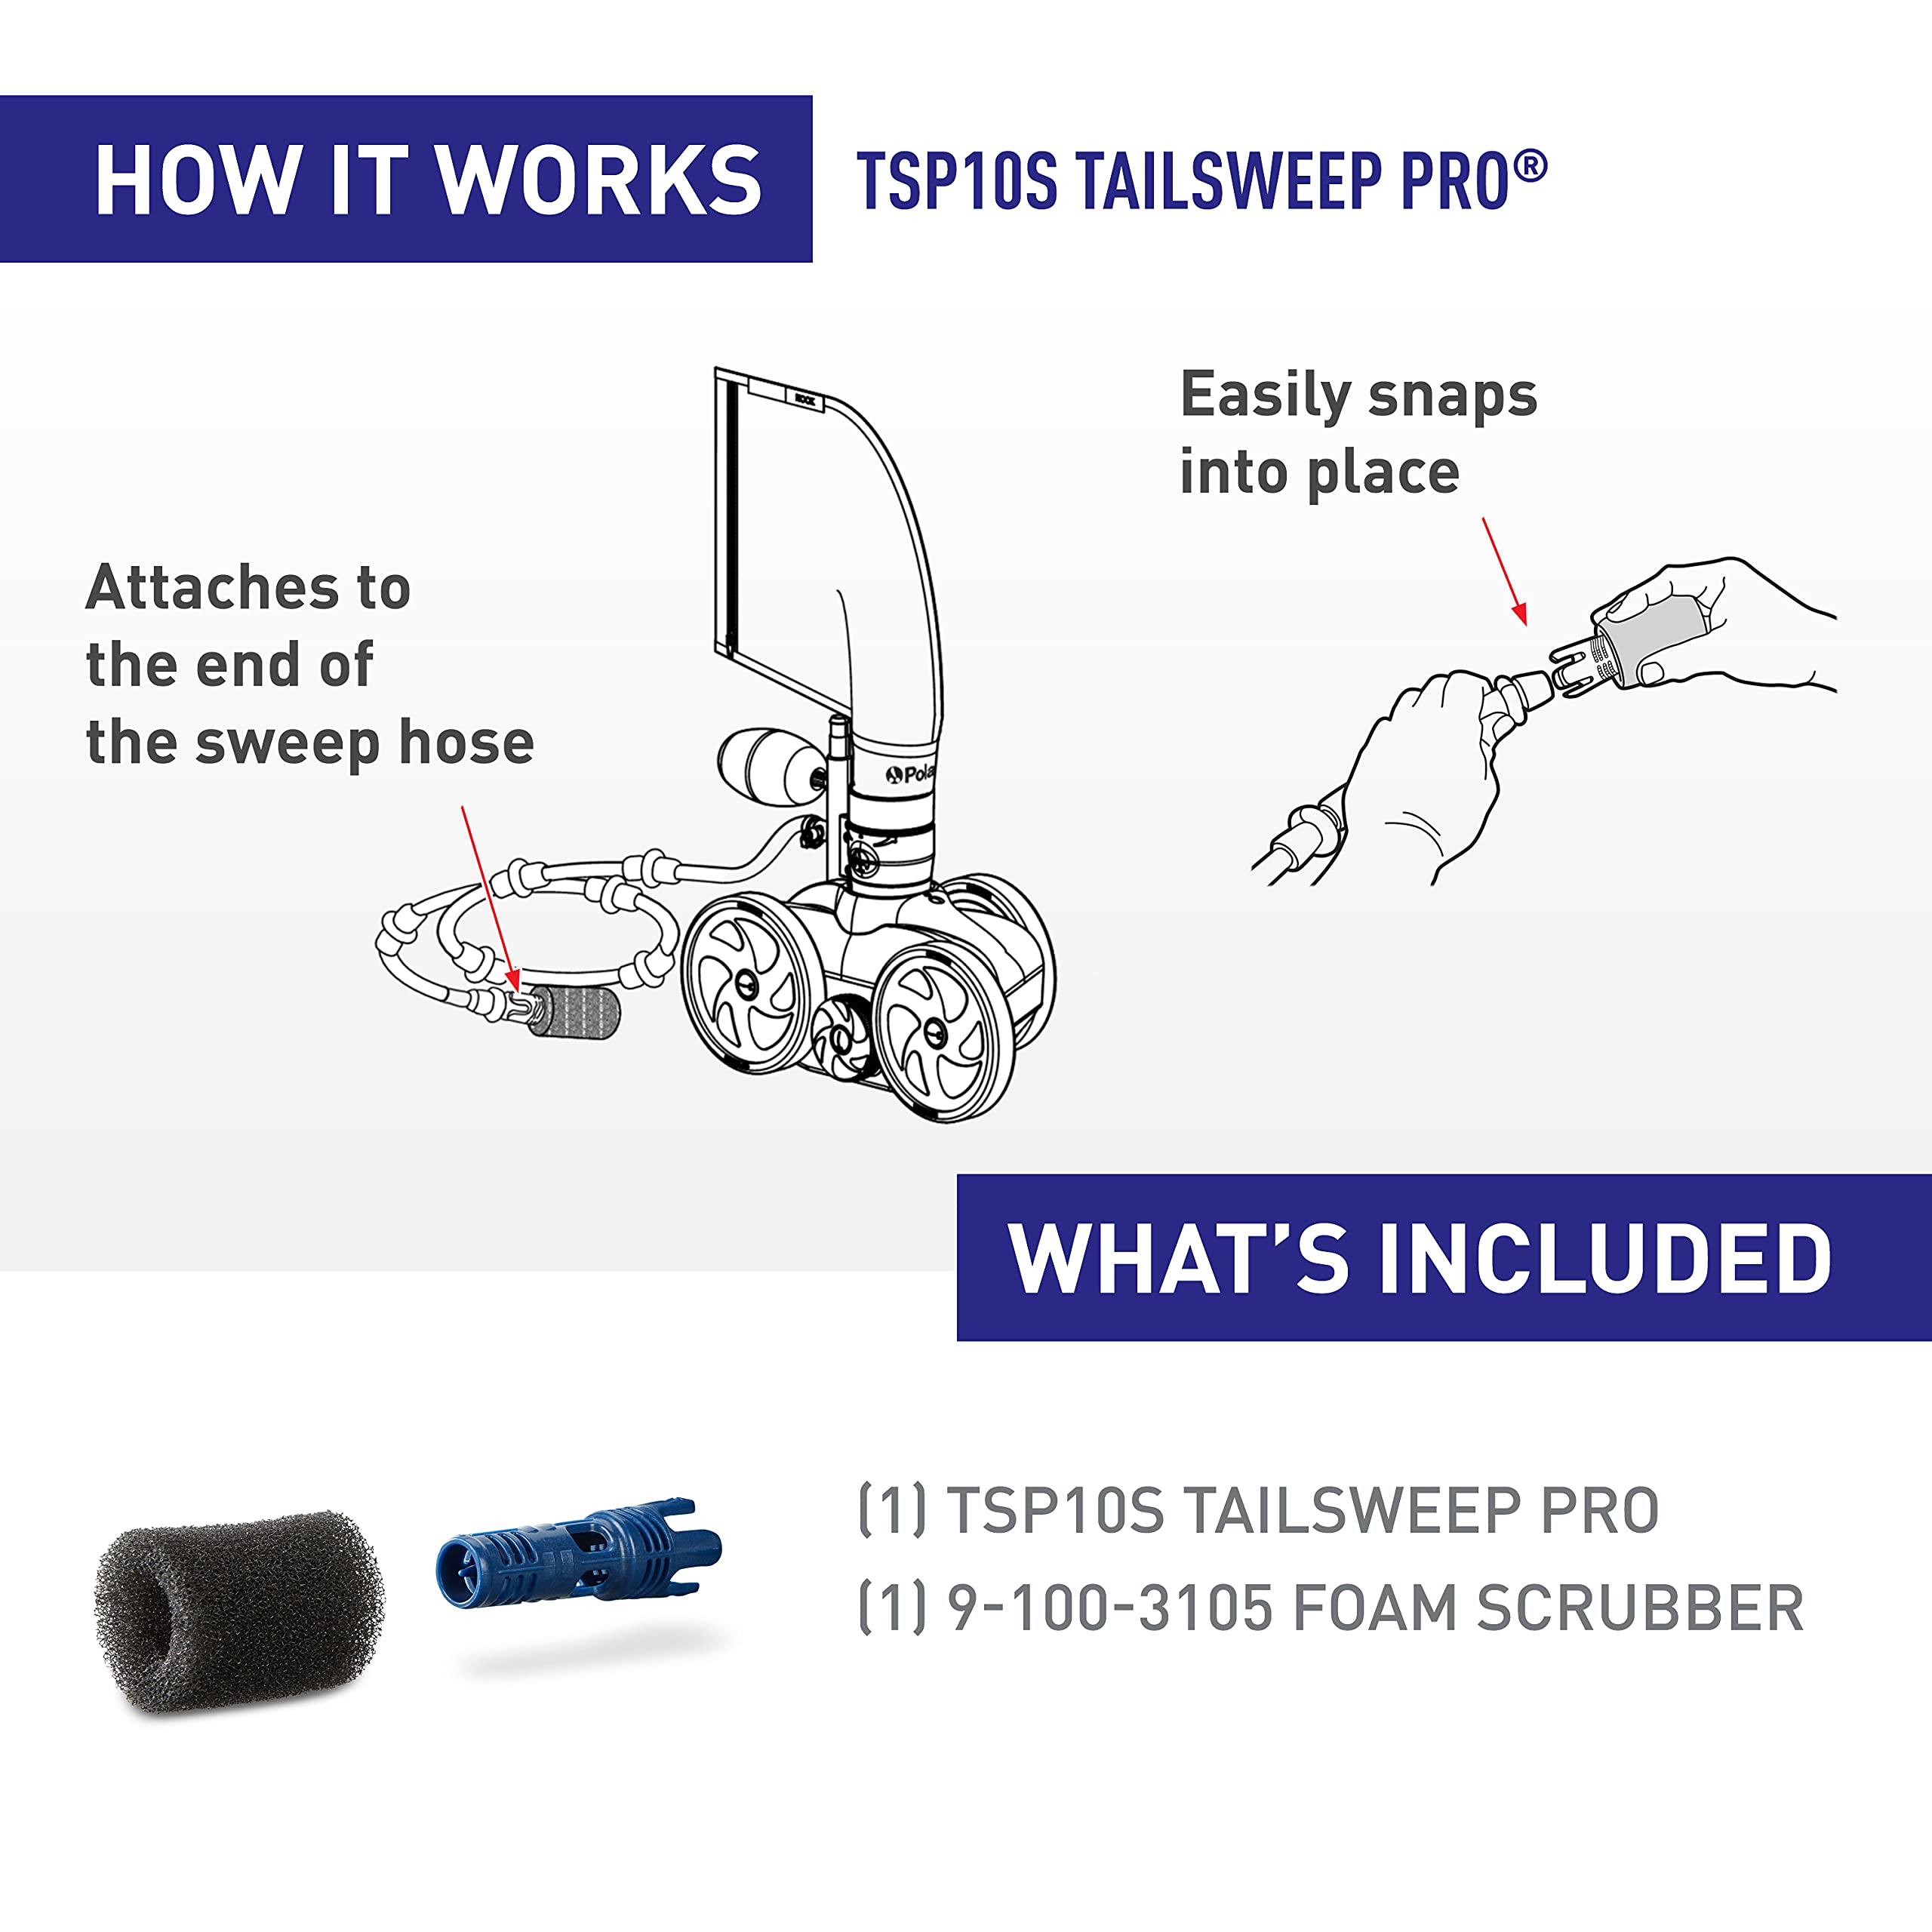 Polaris Genuine Parts TSP10S TailSweep PRO Replacement for Polaris Pressure-Side Pool Cleaners 280, 3900 Sport, 380, 360, 180